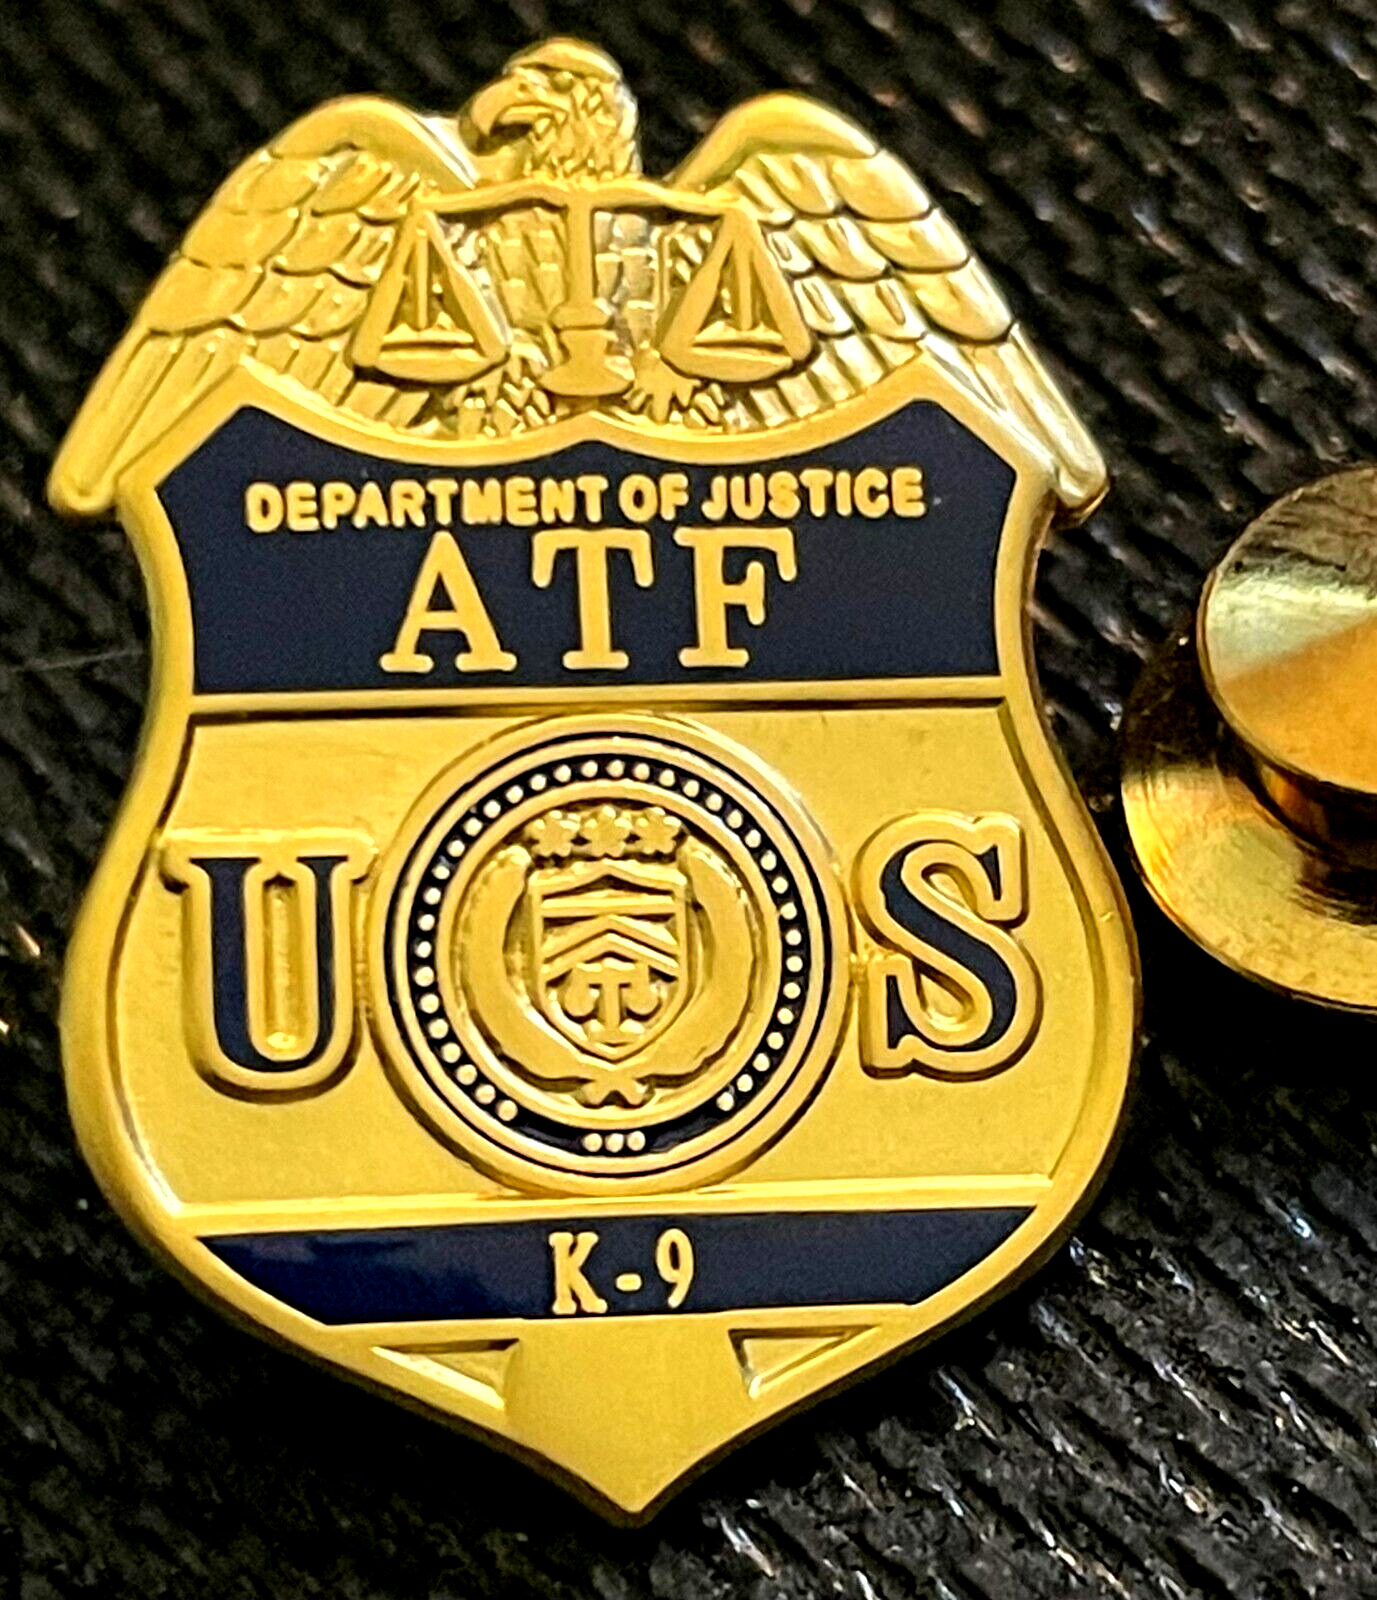 ATF - Alcohol Tobacco Firearms and Explosives K9 - gold lapel Pin - VERY RARE